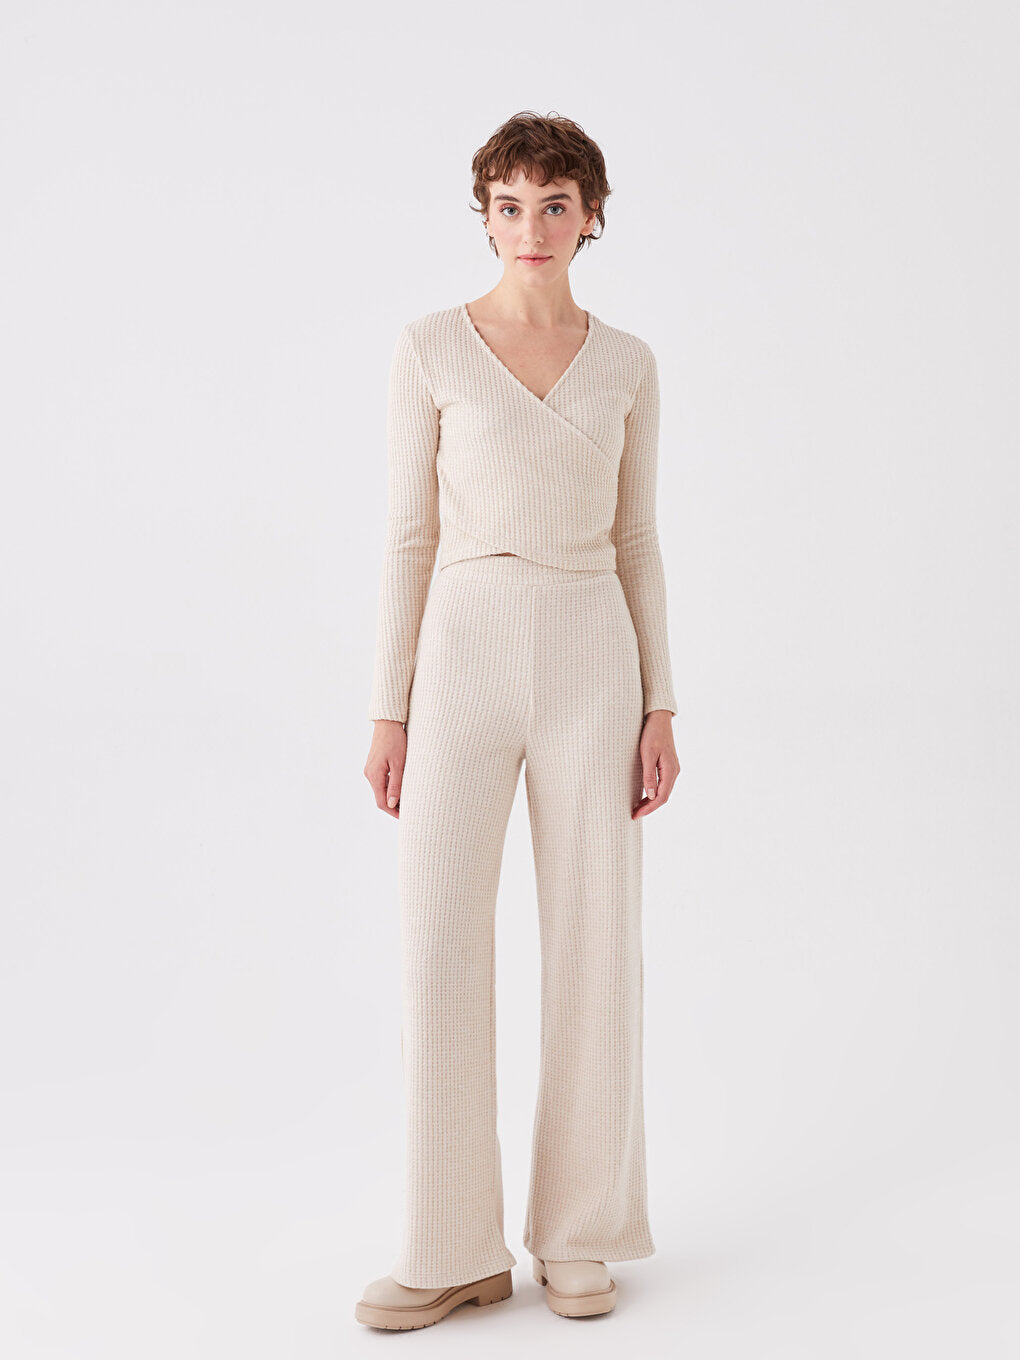 Self-patterned Women Trousers with Elastic Waist